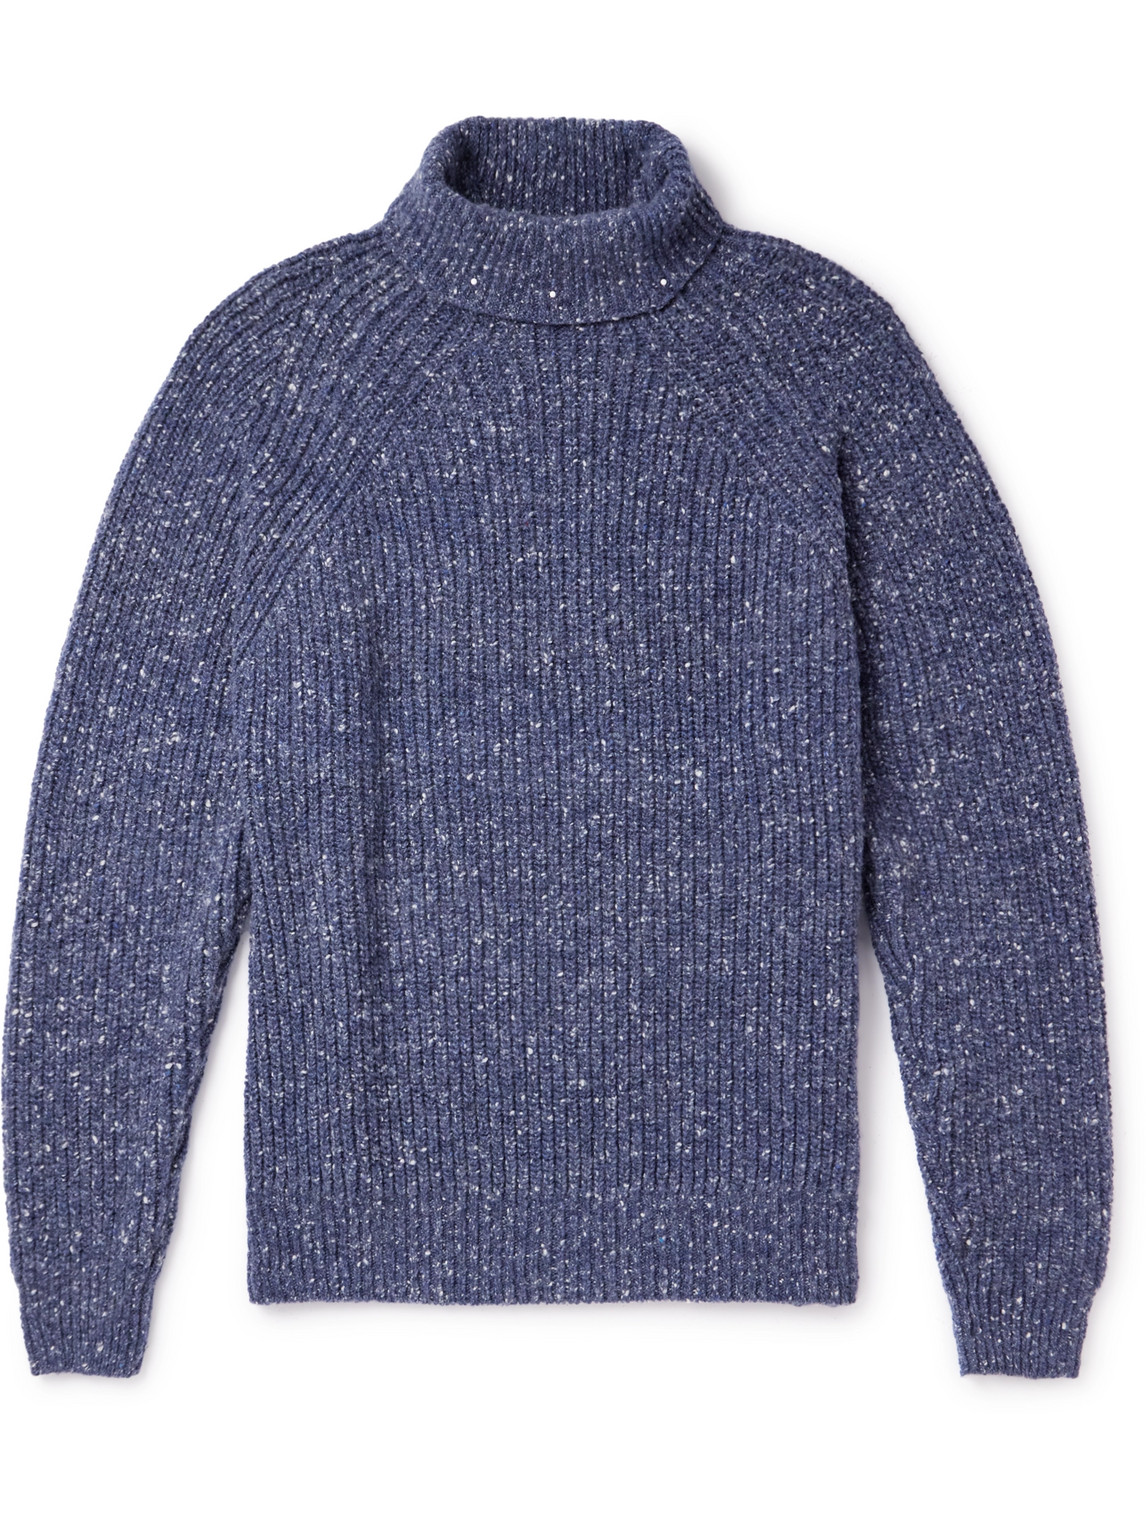 INIS MEAIN BOATBUILDER RIBBED CASHMERE ROLLNECK SWEATER